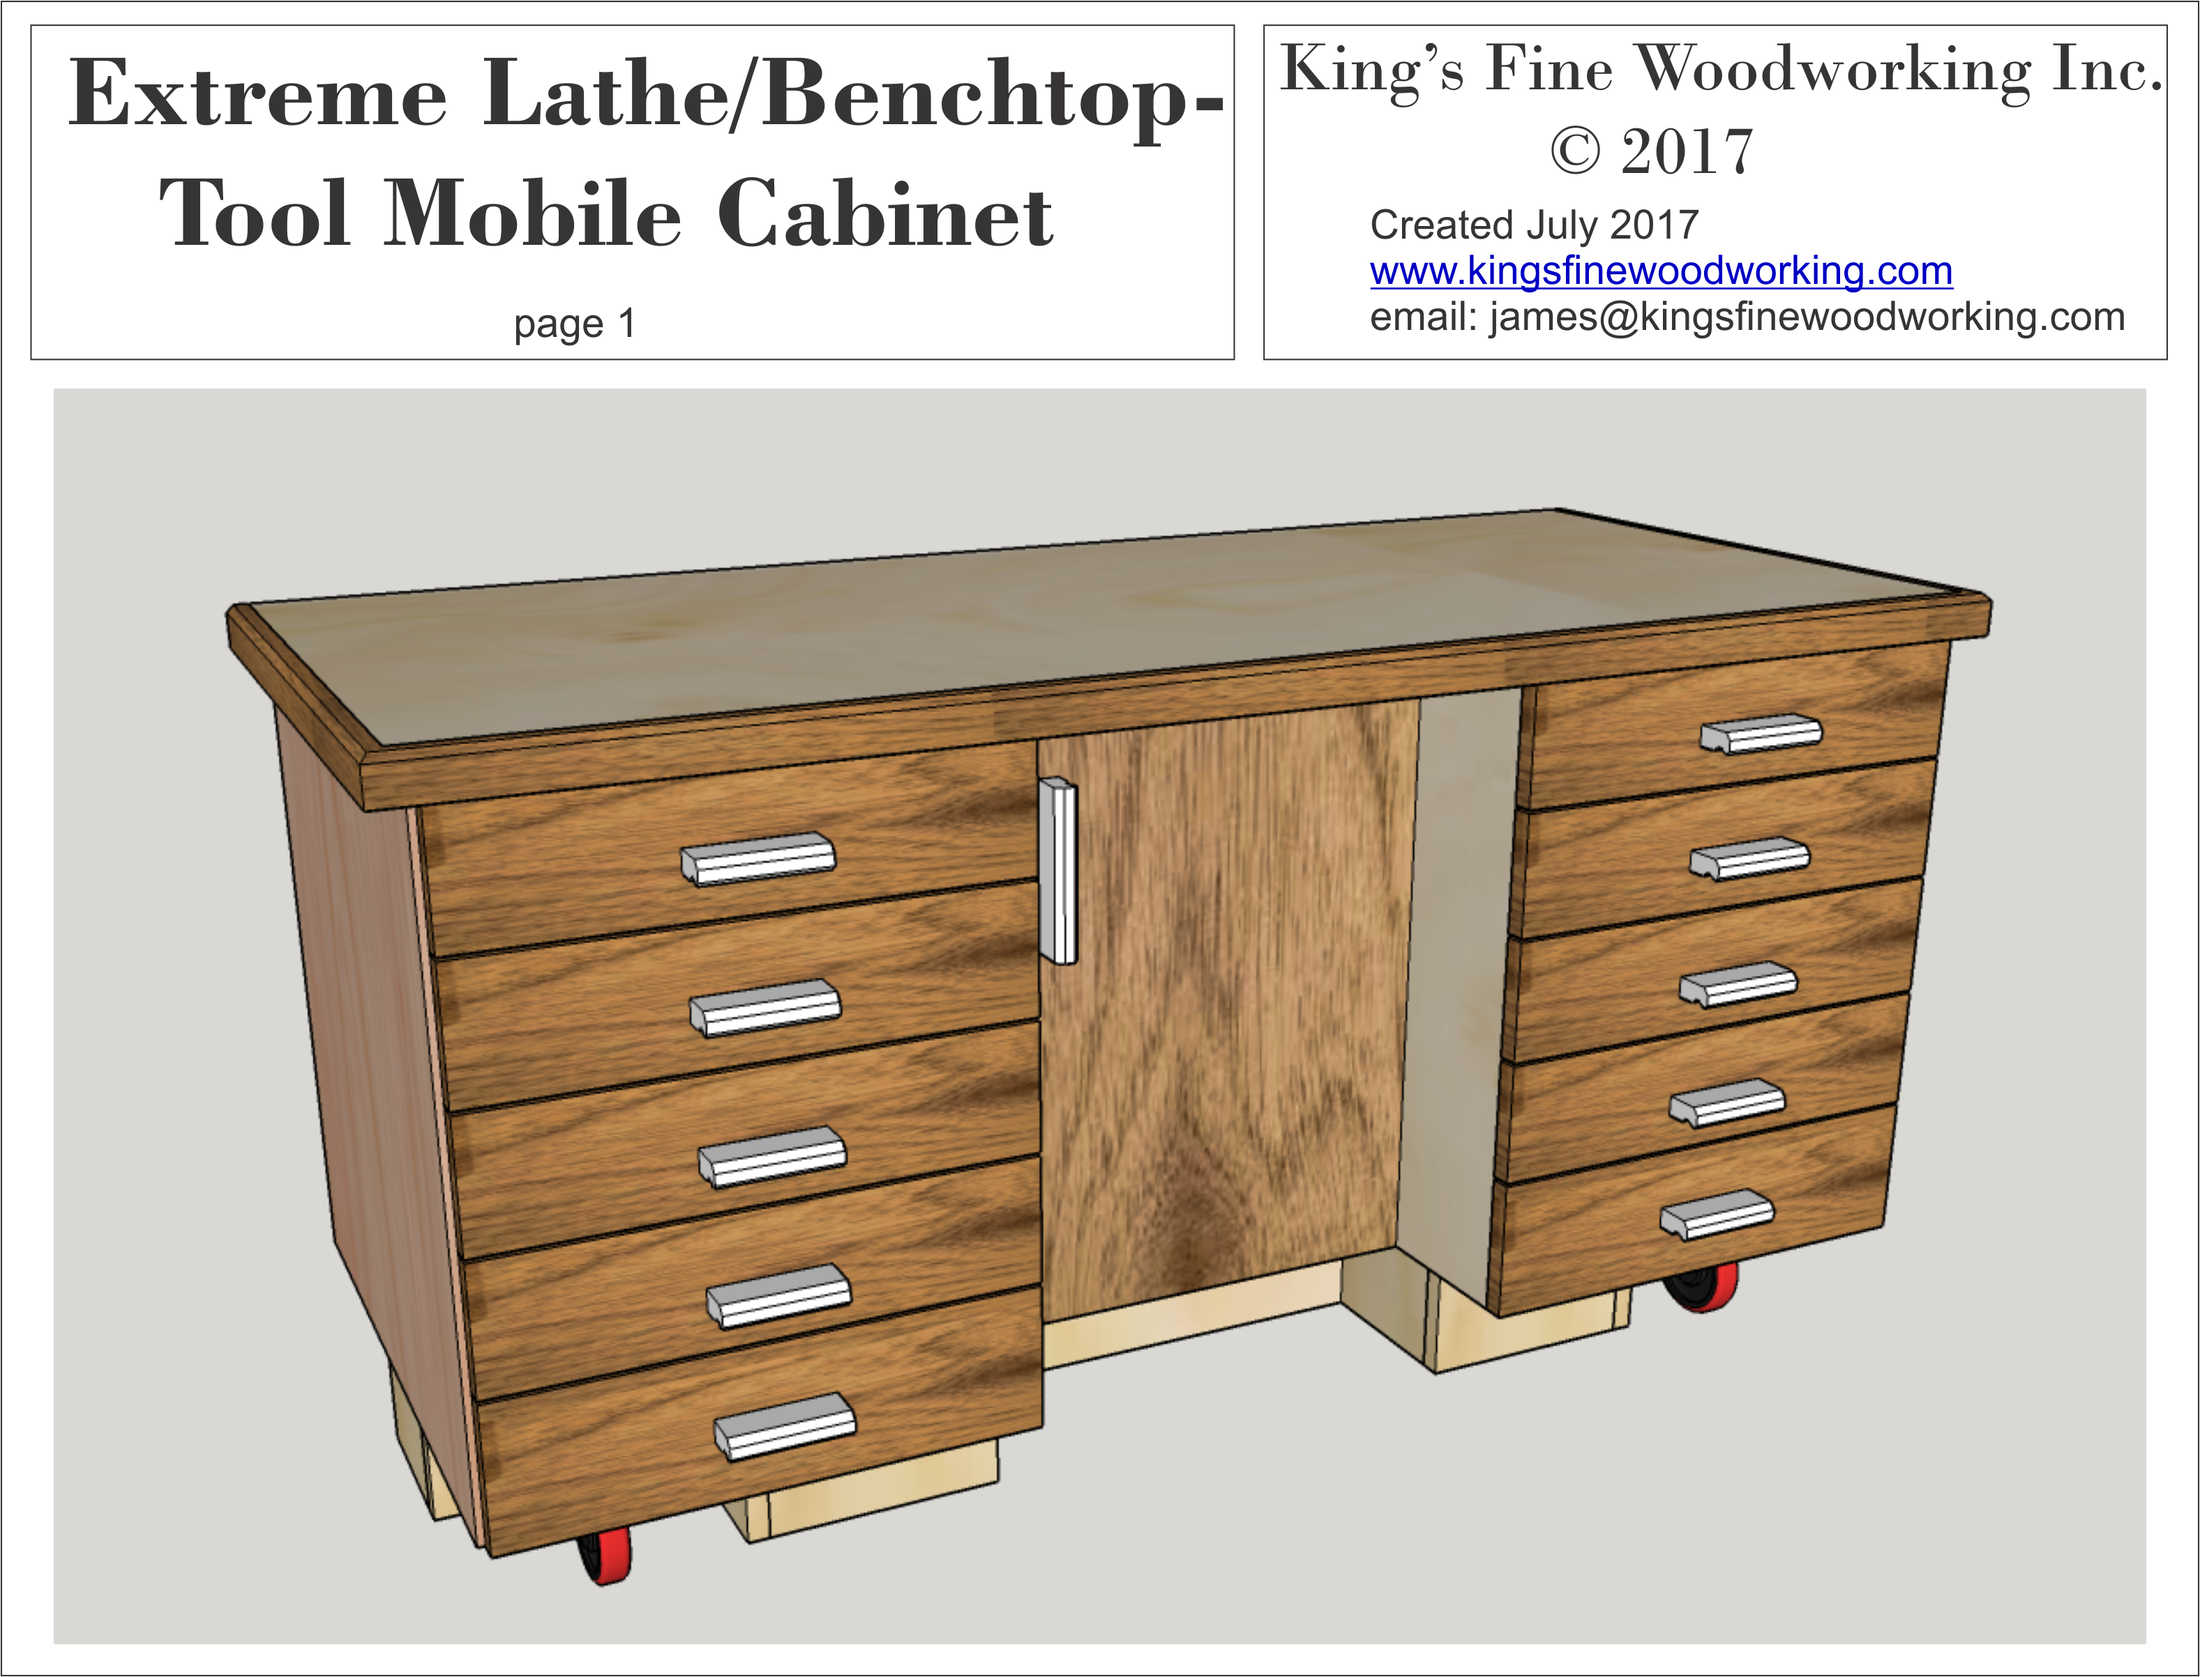 Extreme Lathe/Benchtop-Tool Mobile Cabinet Plans